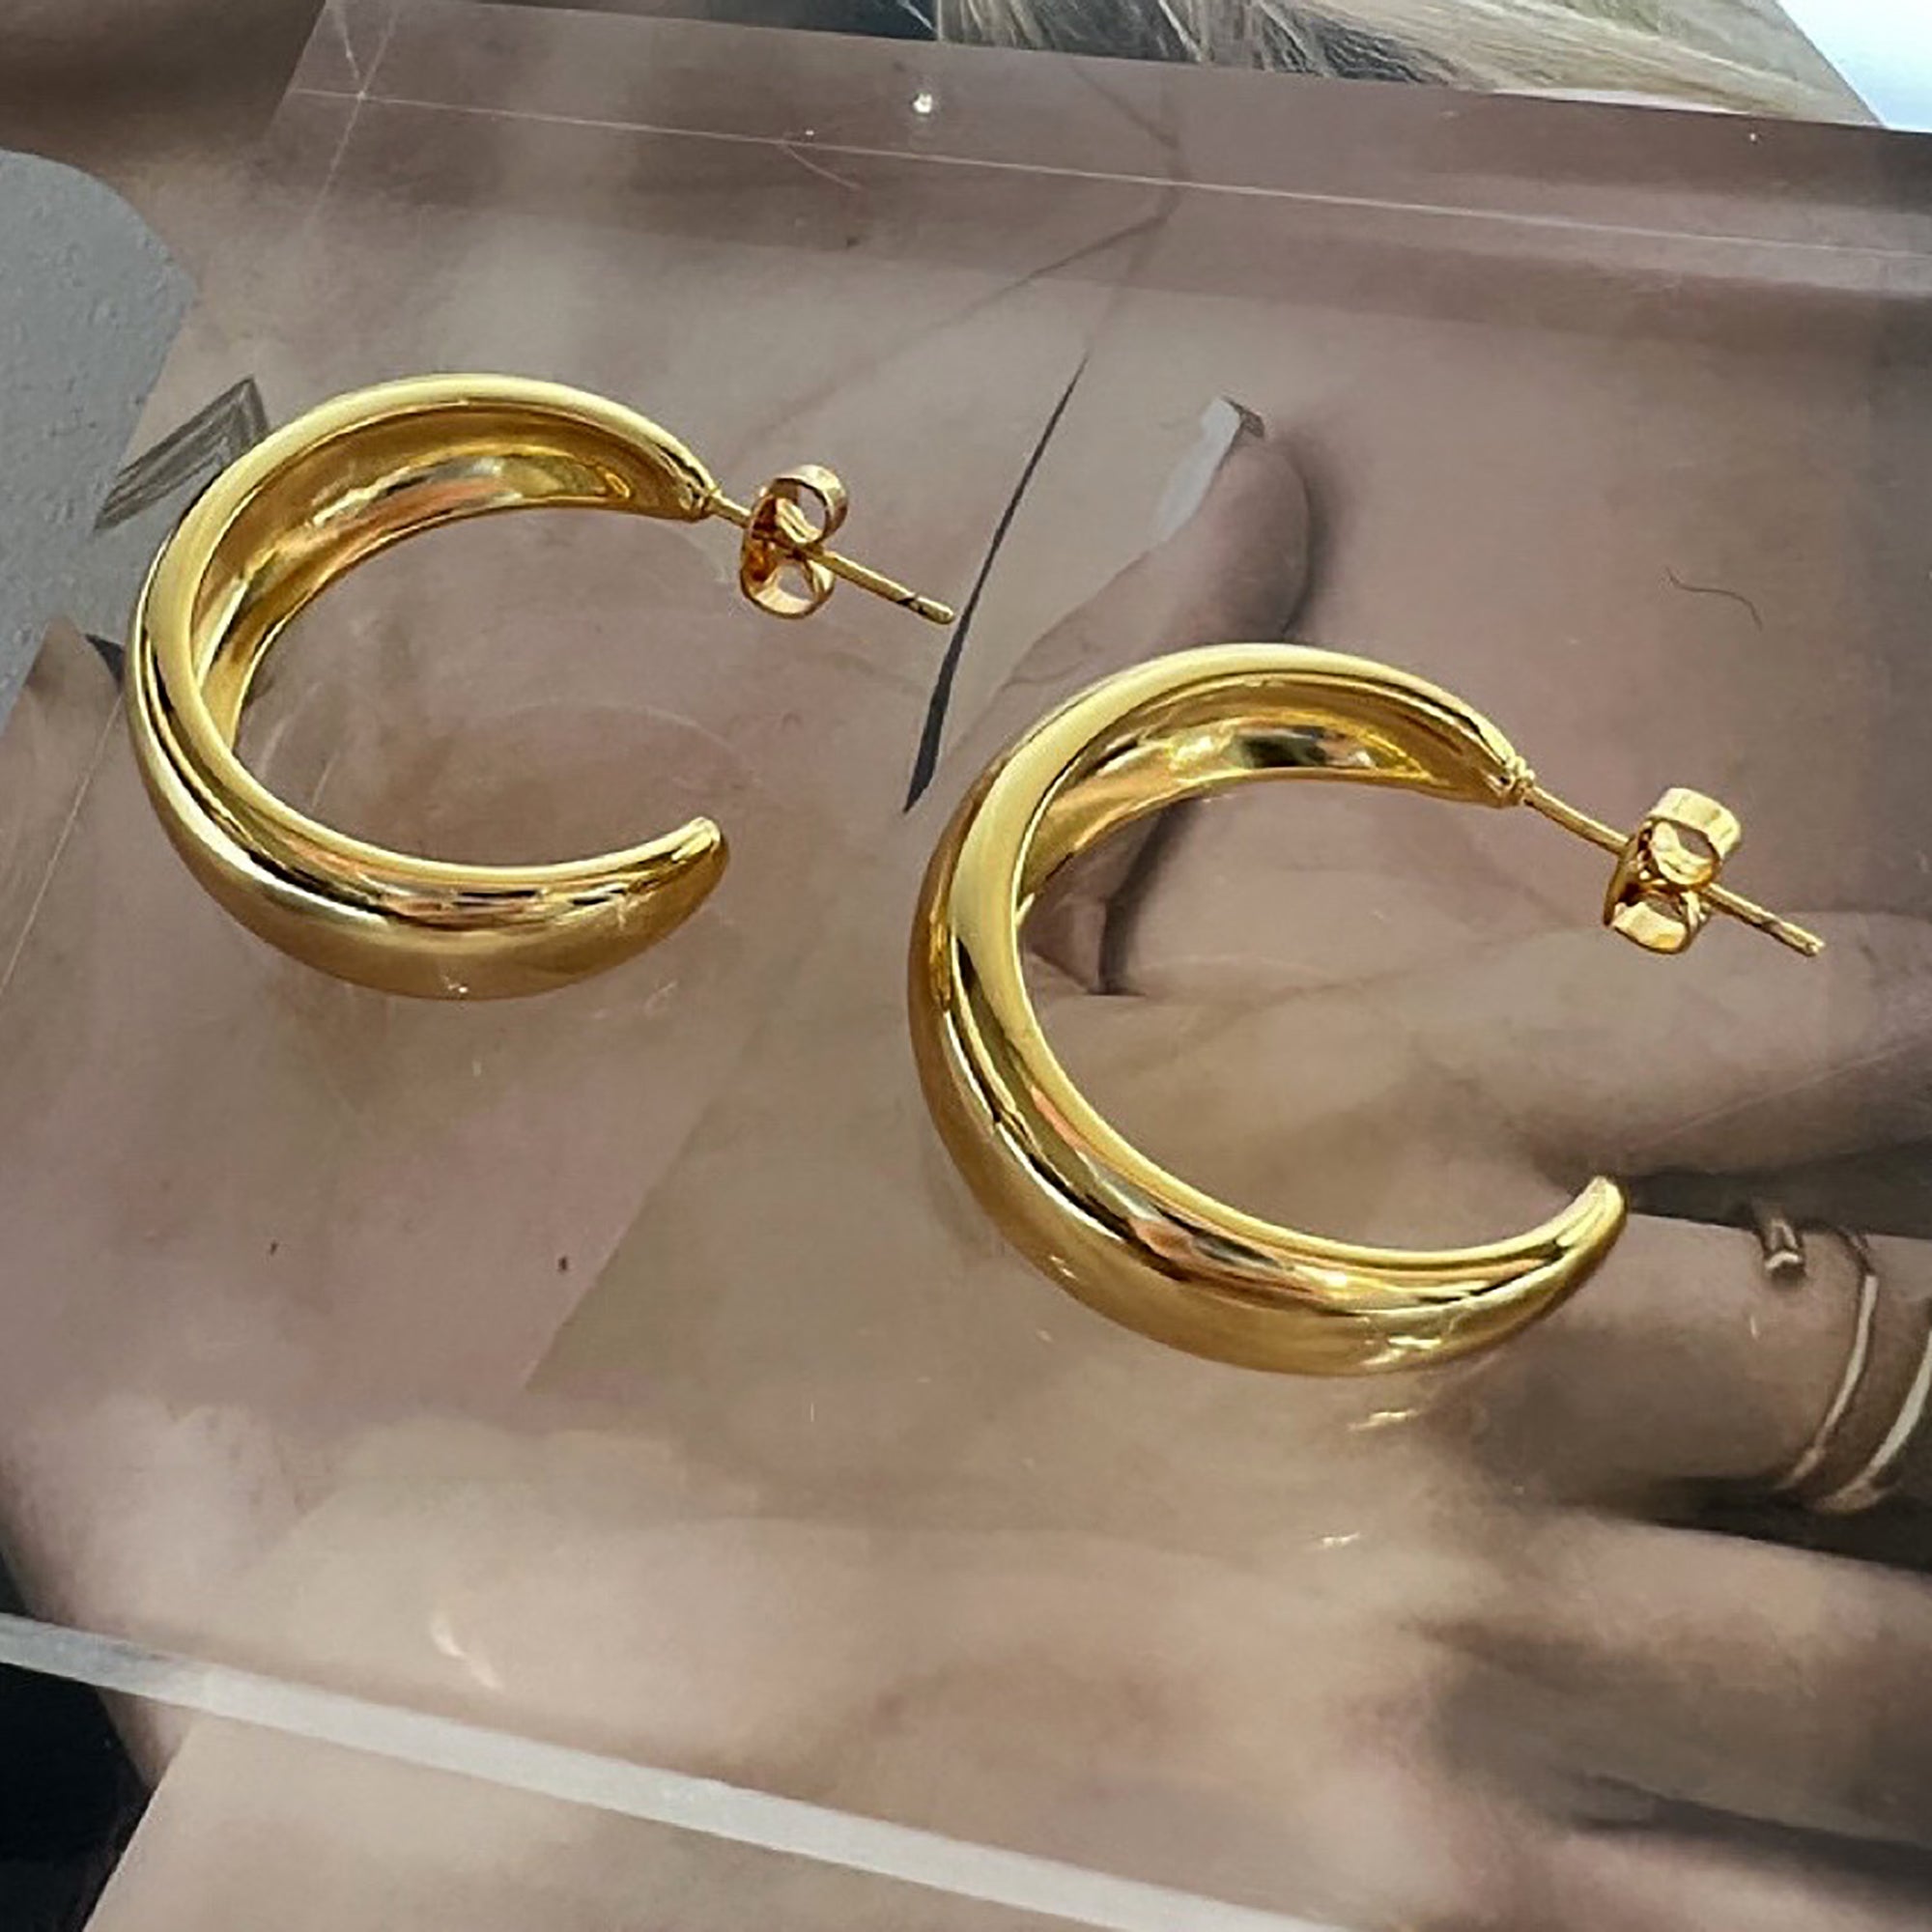 Vintage Gold Plated C Hoop Earrings Gift wedding influencer styling KOL / Youtuber / Celebrity / Fashion Icon